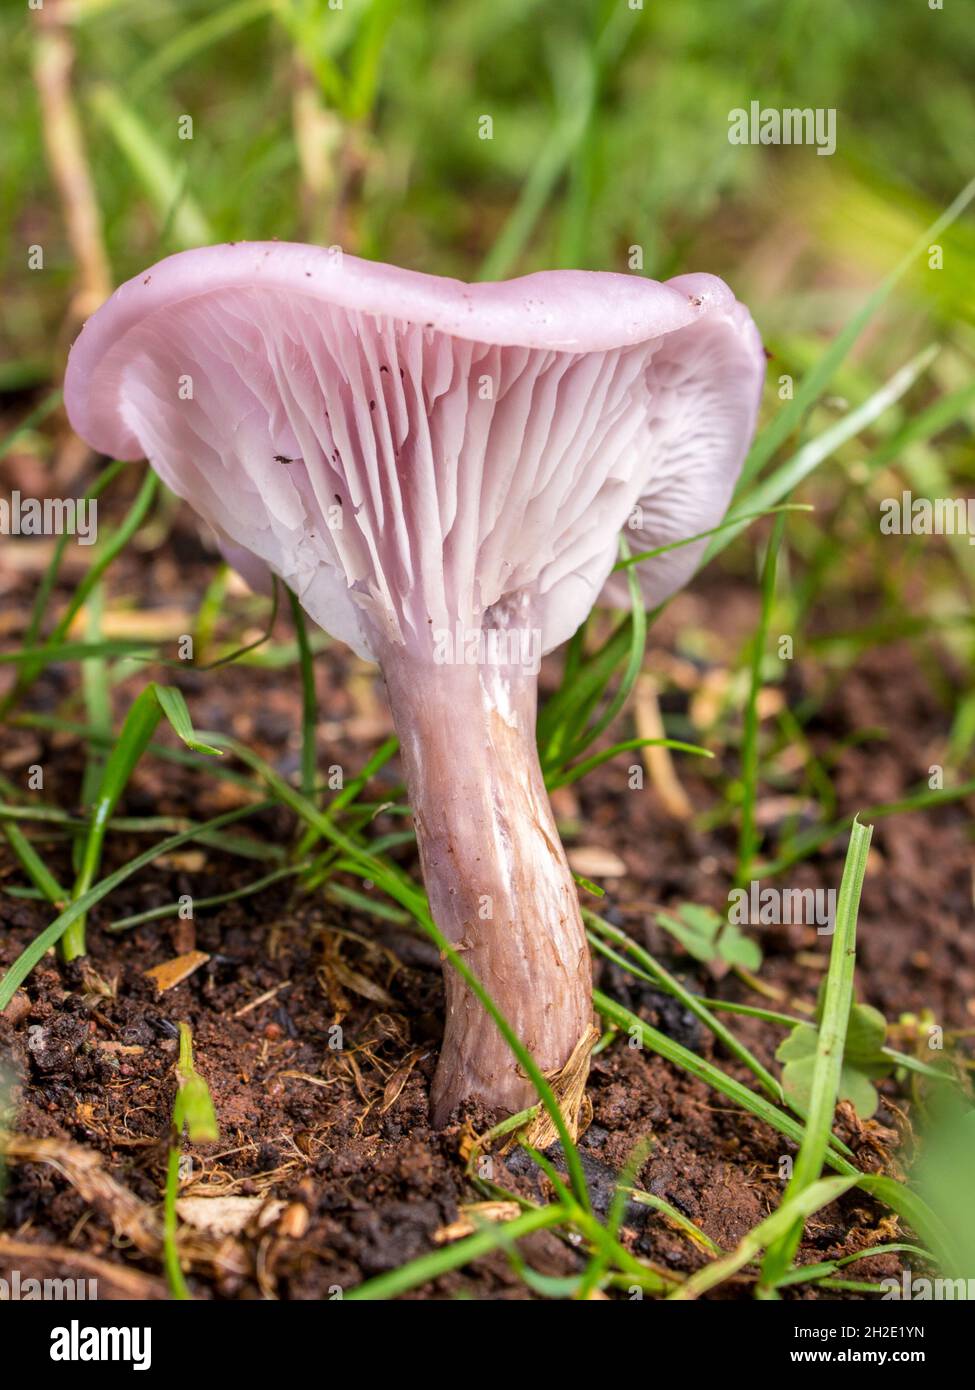 A Pinkish wild funnel shaped mushroom growing on a lawn. Stock Photo